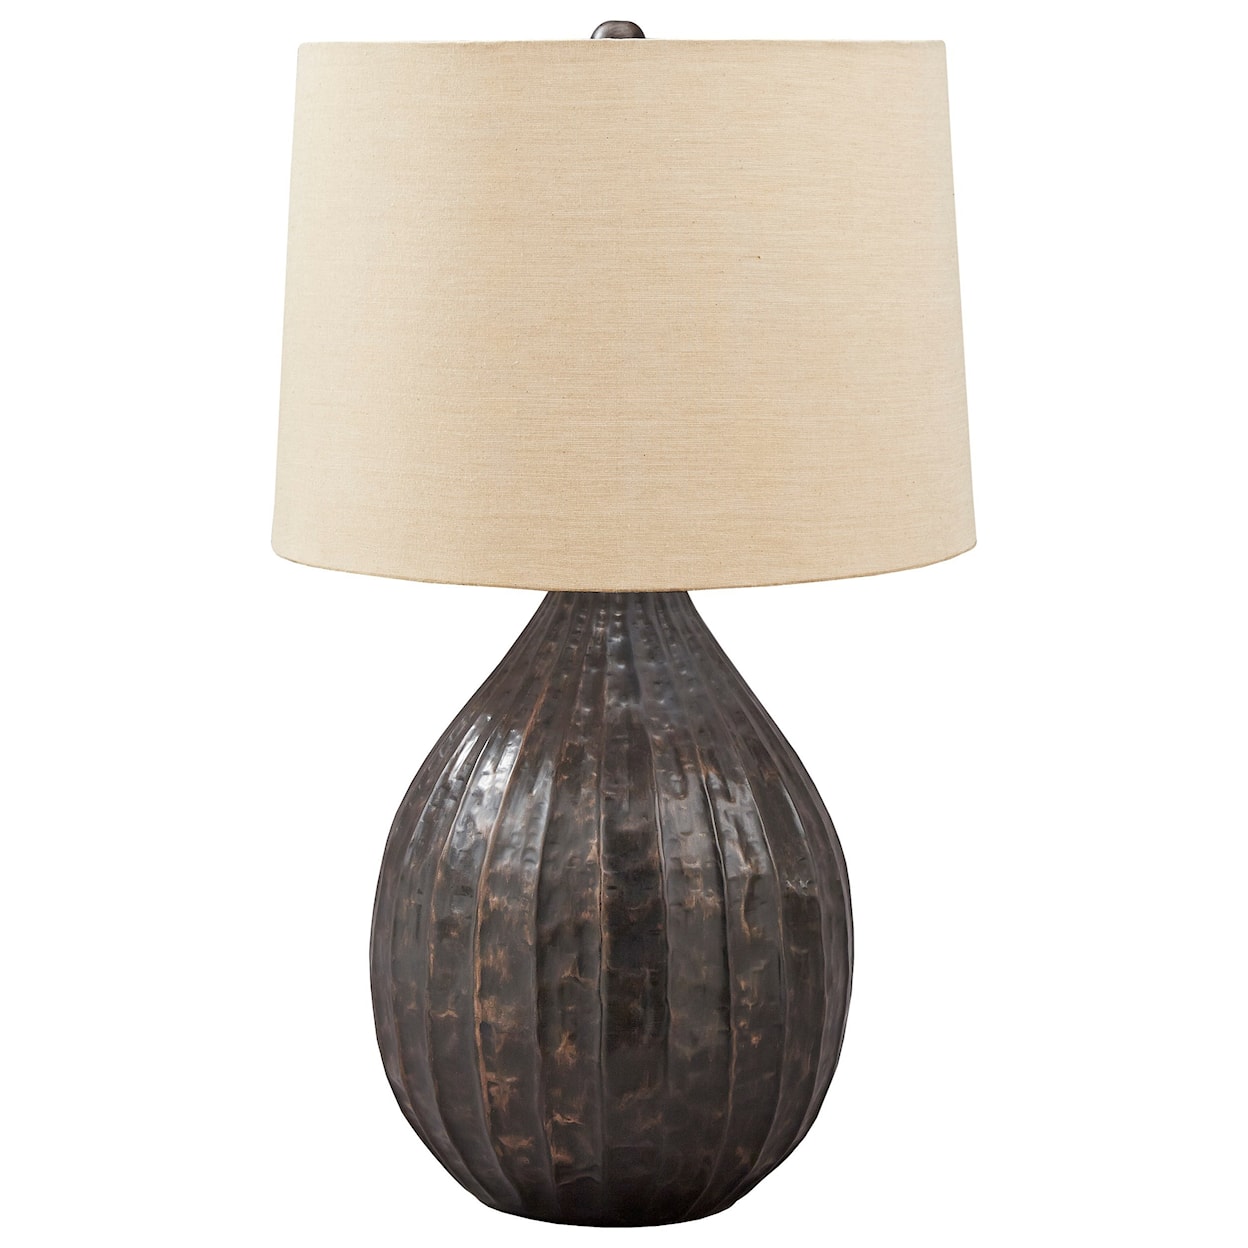 Signature Design by Ashley Lamps - Casual Table Lamp